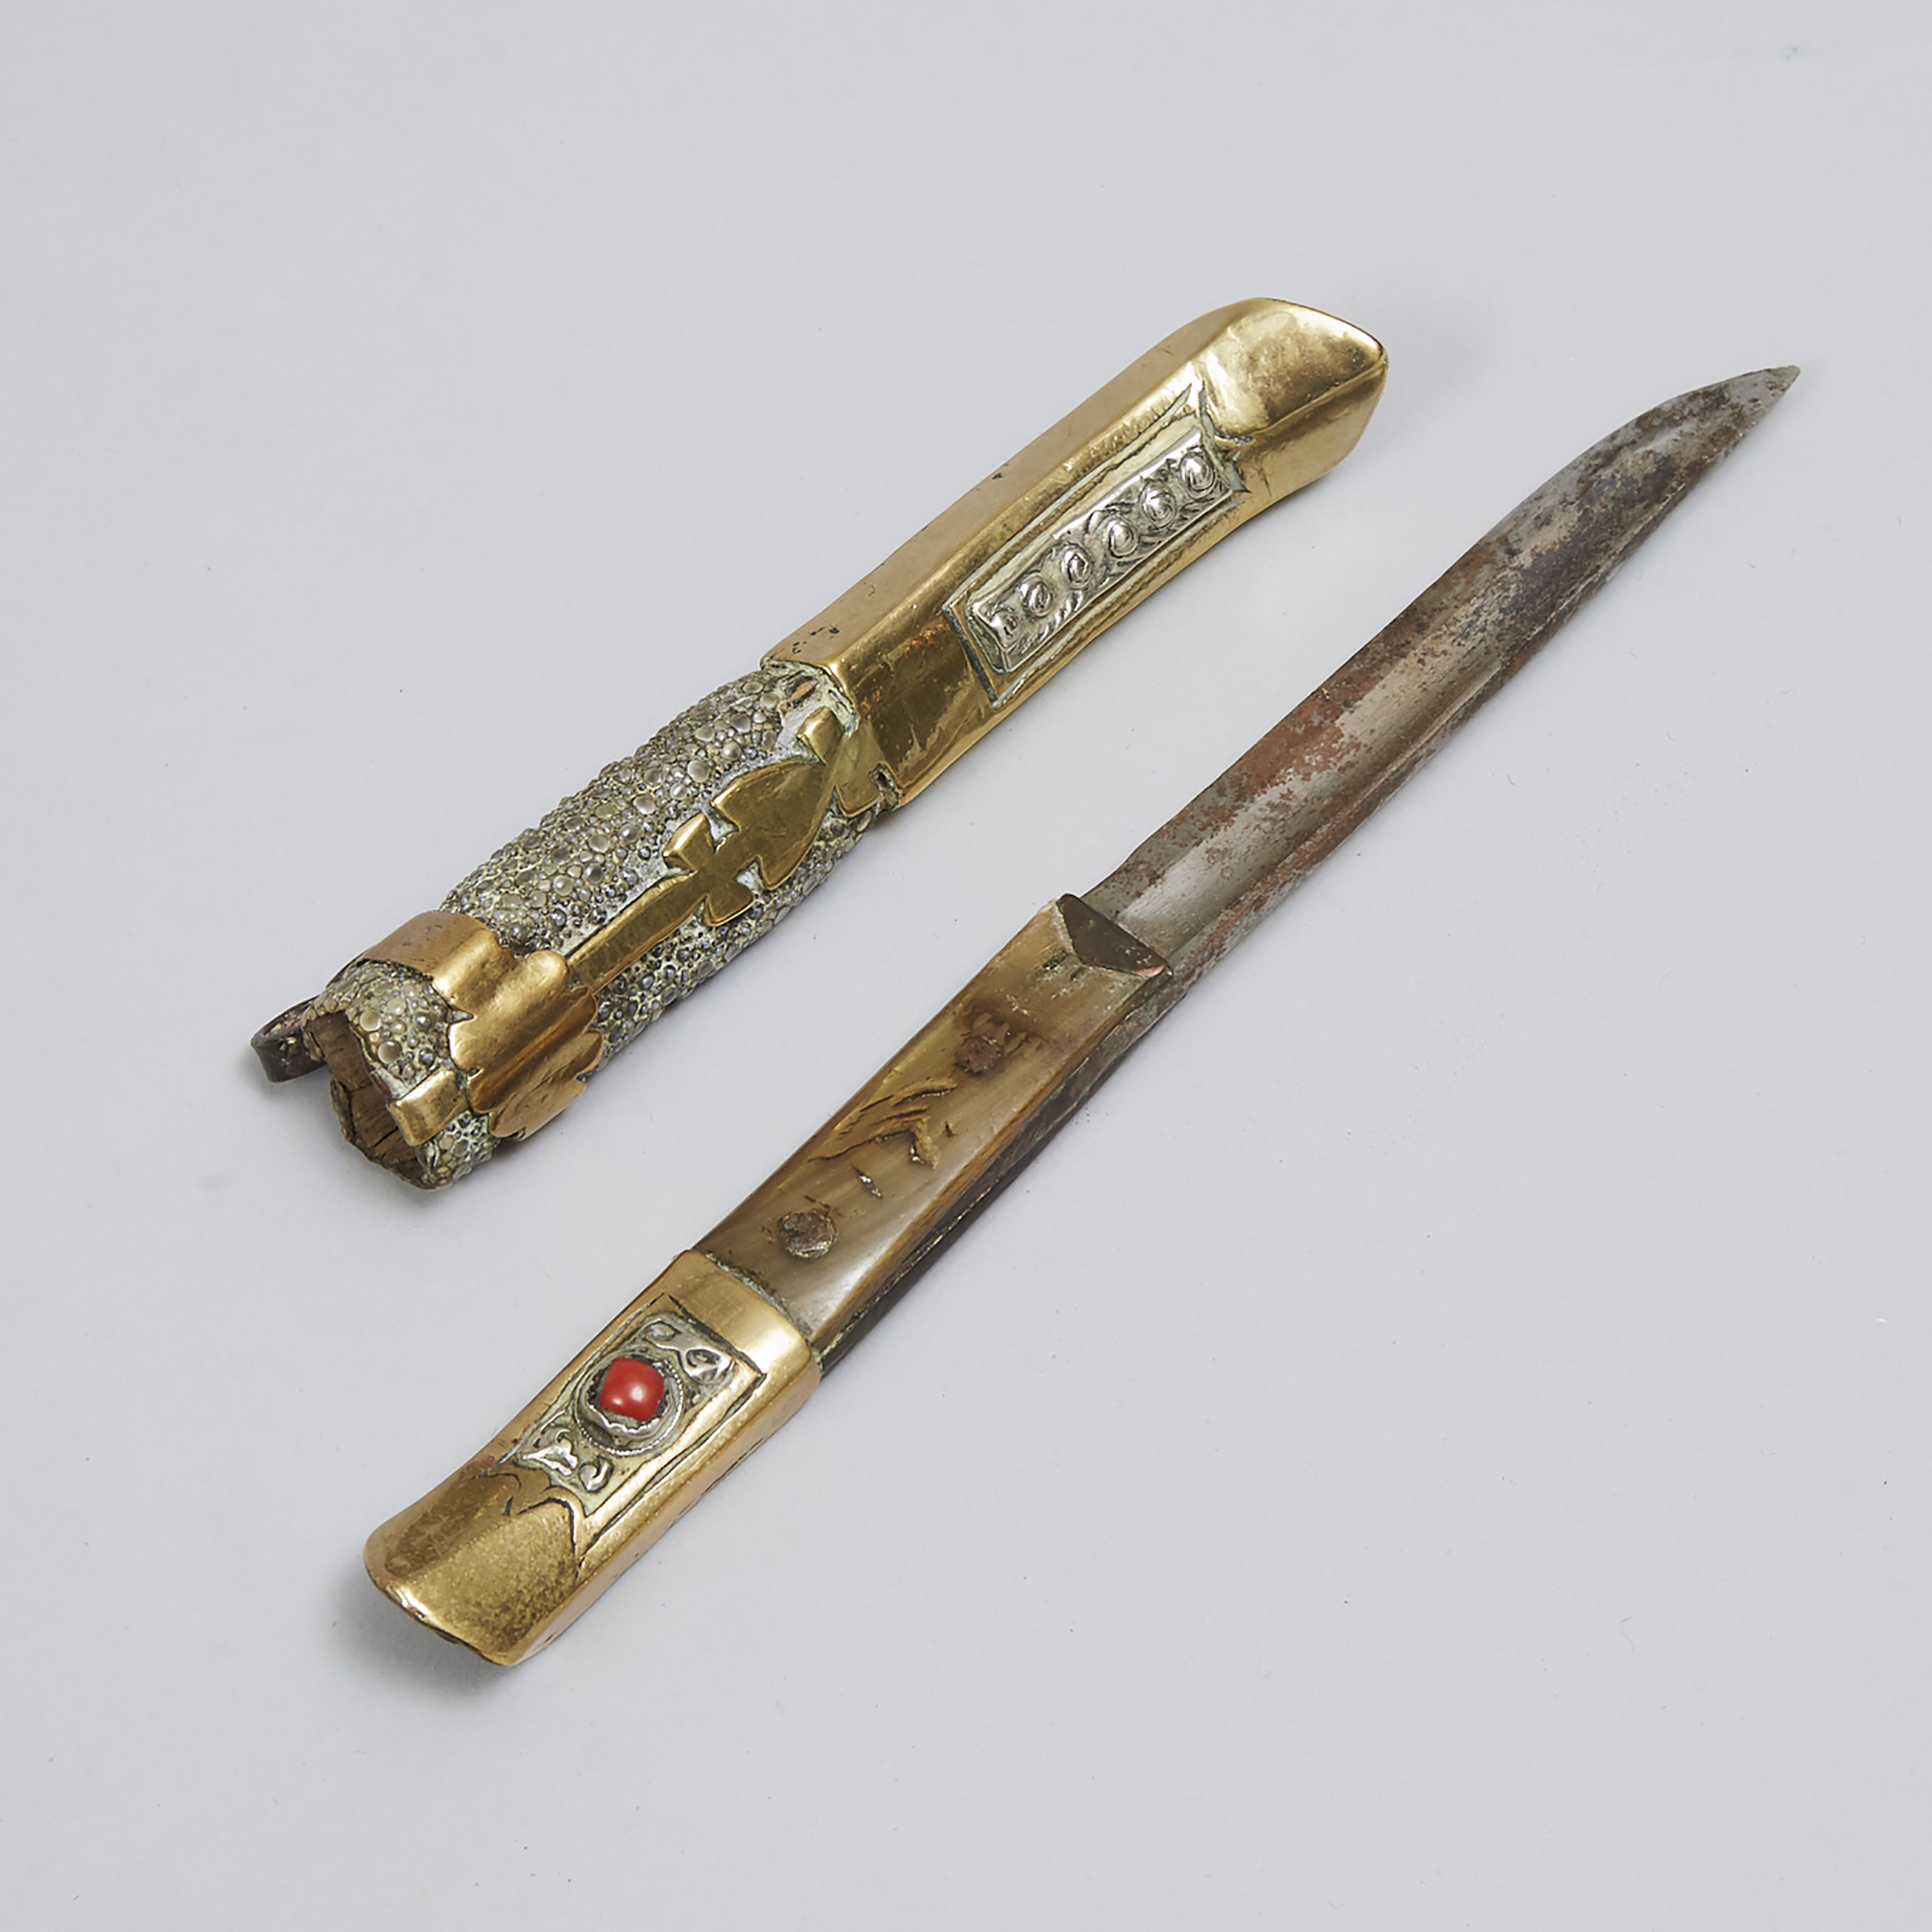 Tibetan Brass, Copper and Silver Mounted Lothi Knife, c.1900